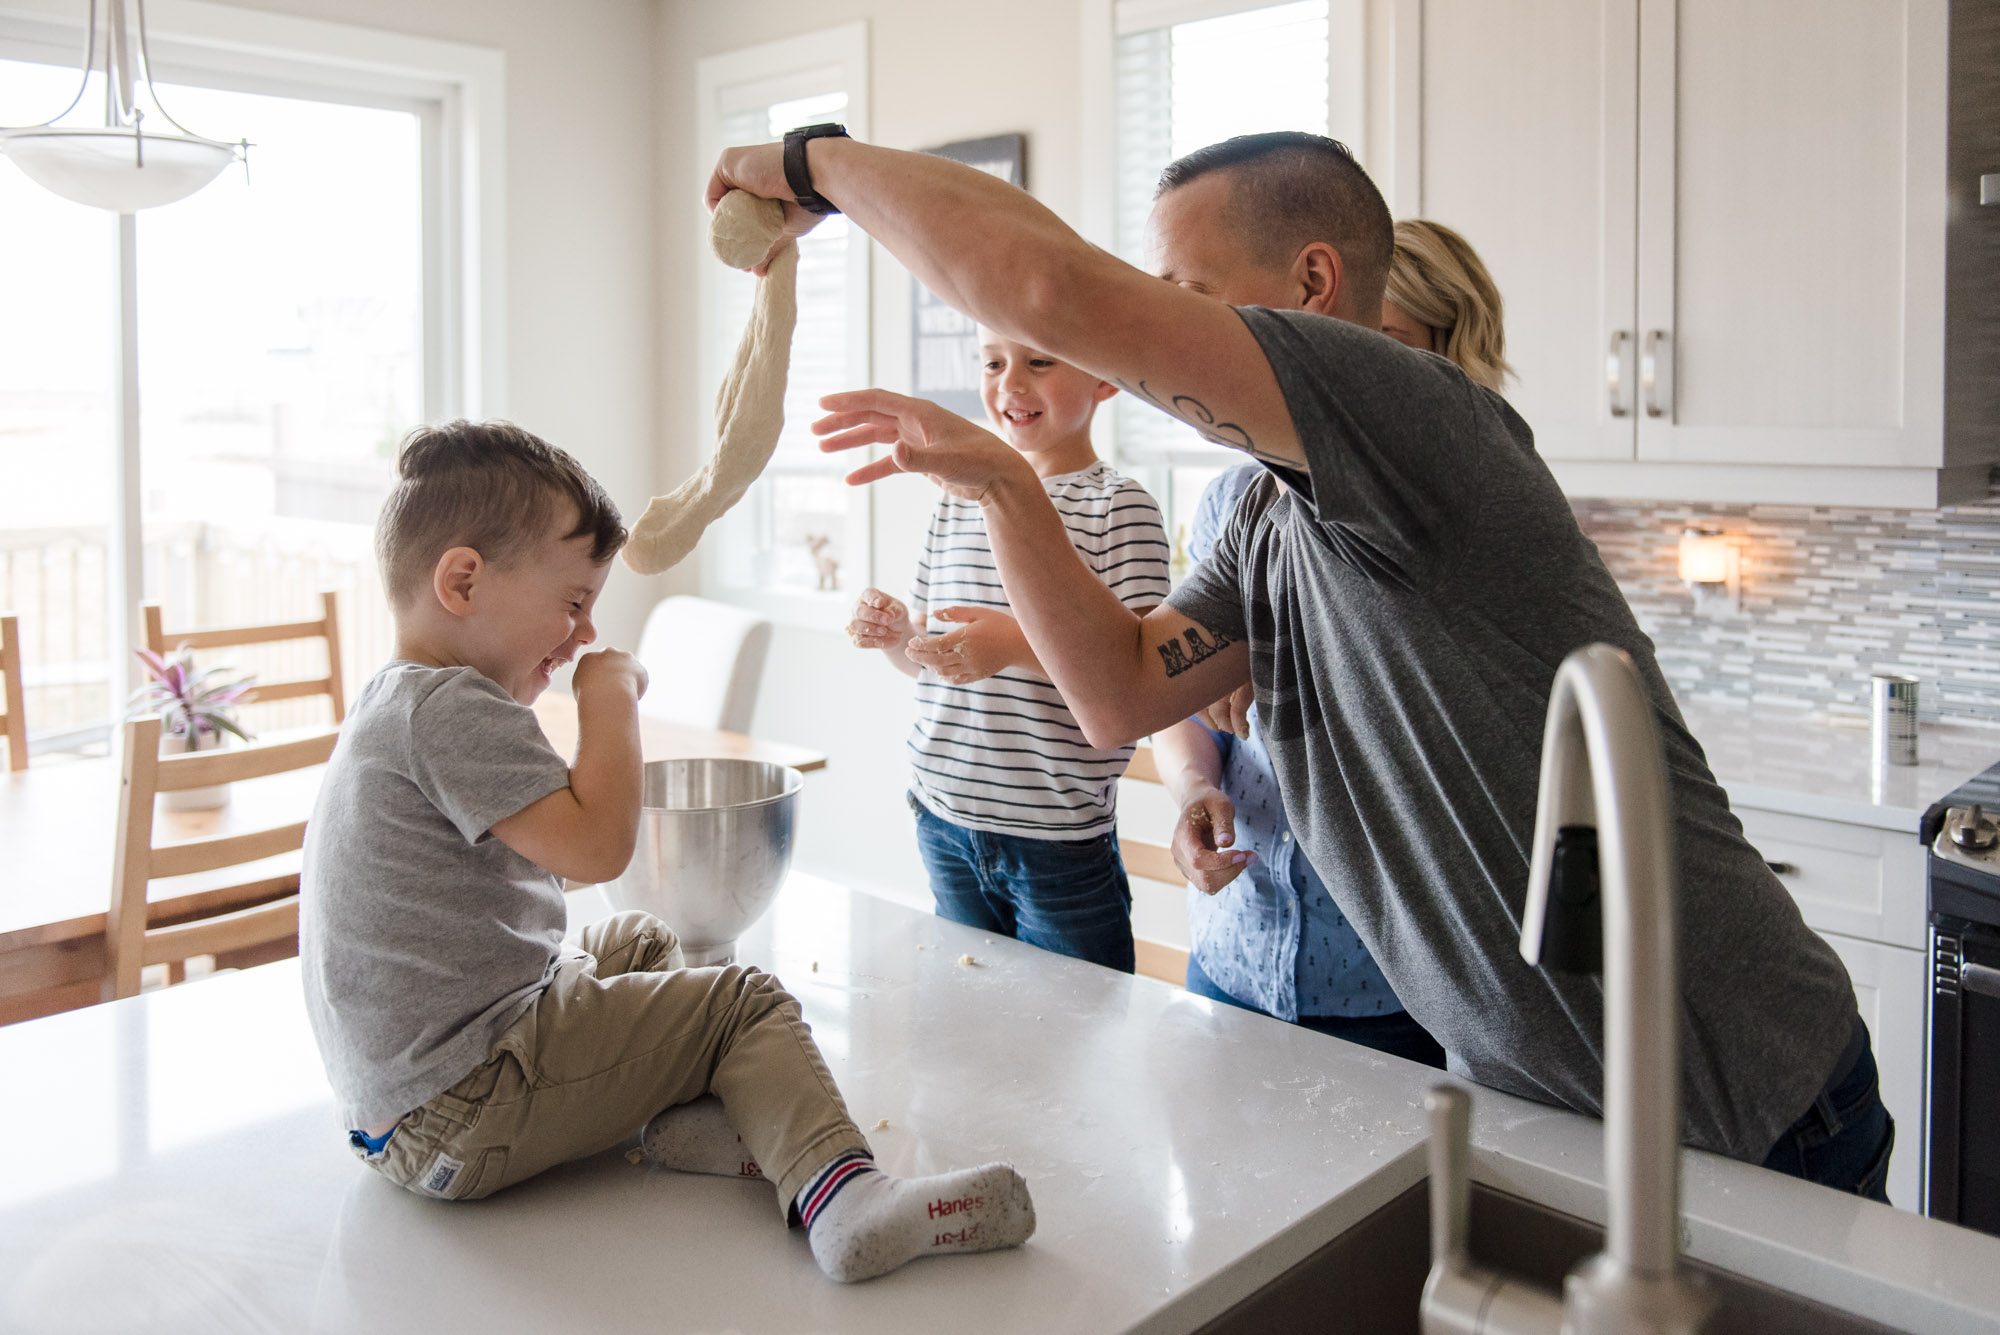 A family makes pizza together in their home in the Paisley neighbourhood of Edmonton, Alberta